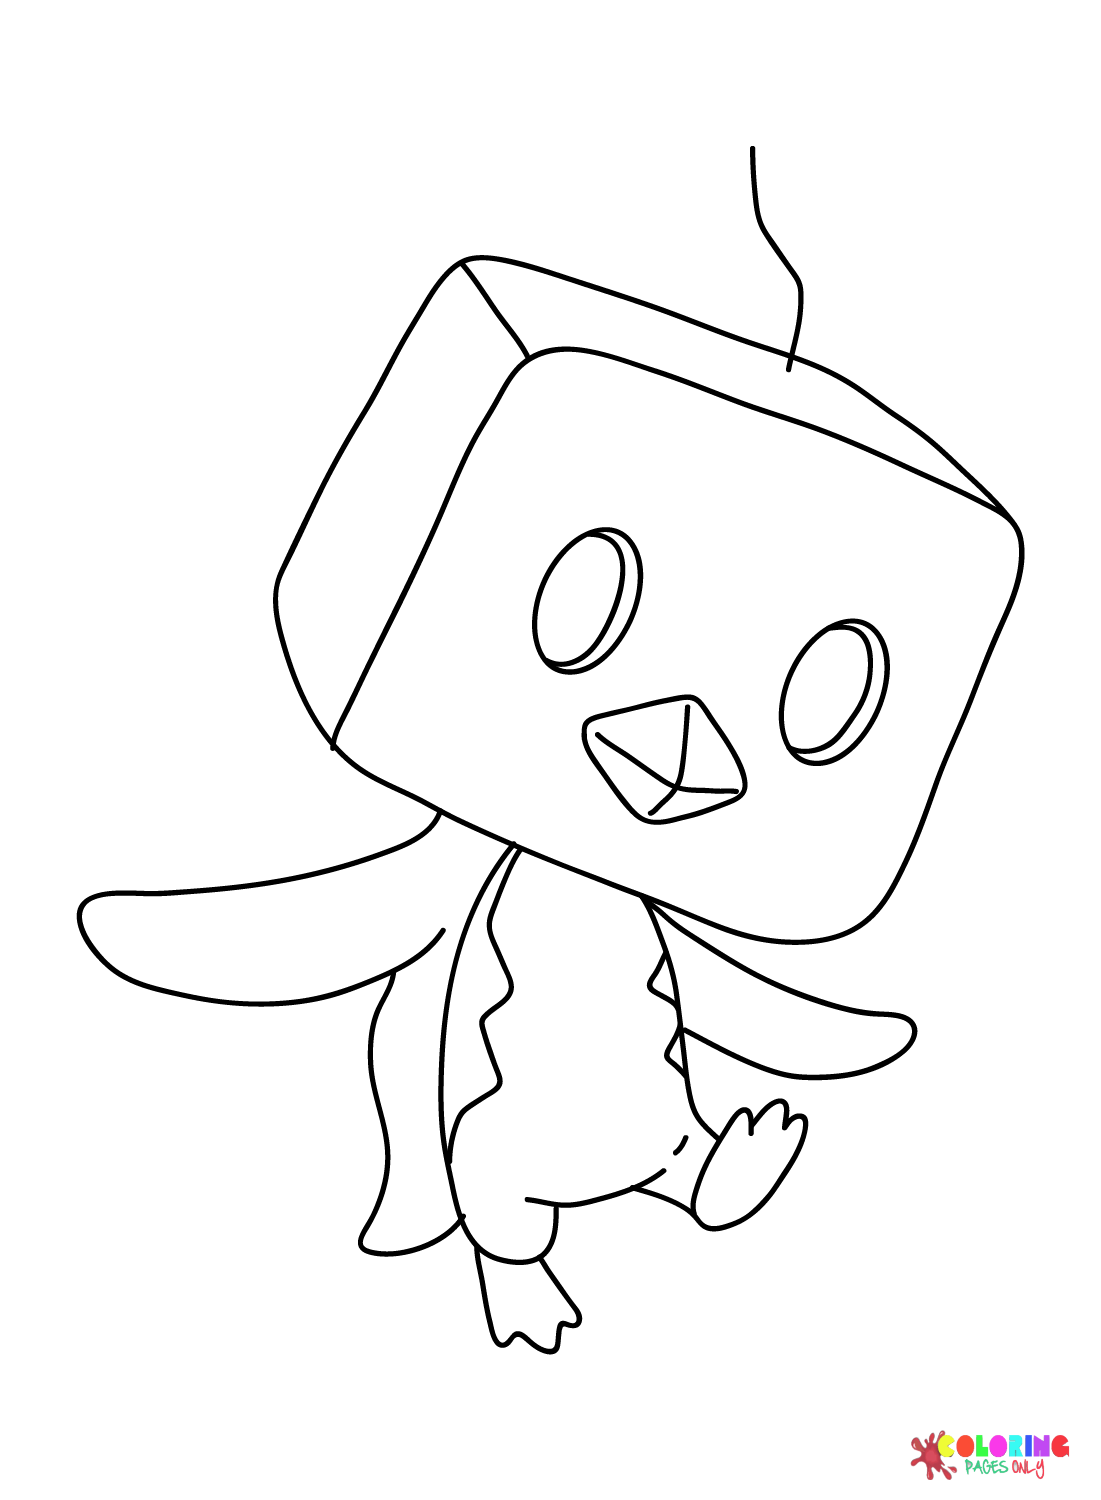 The Pokemon Eiscue Coloring Page